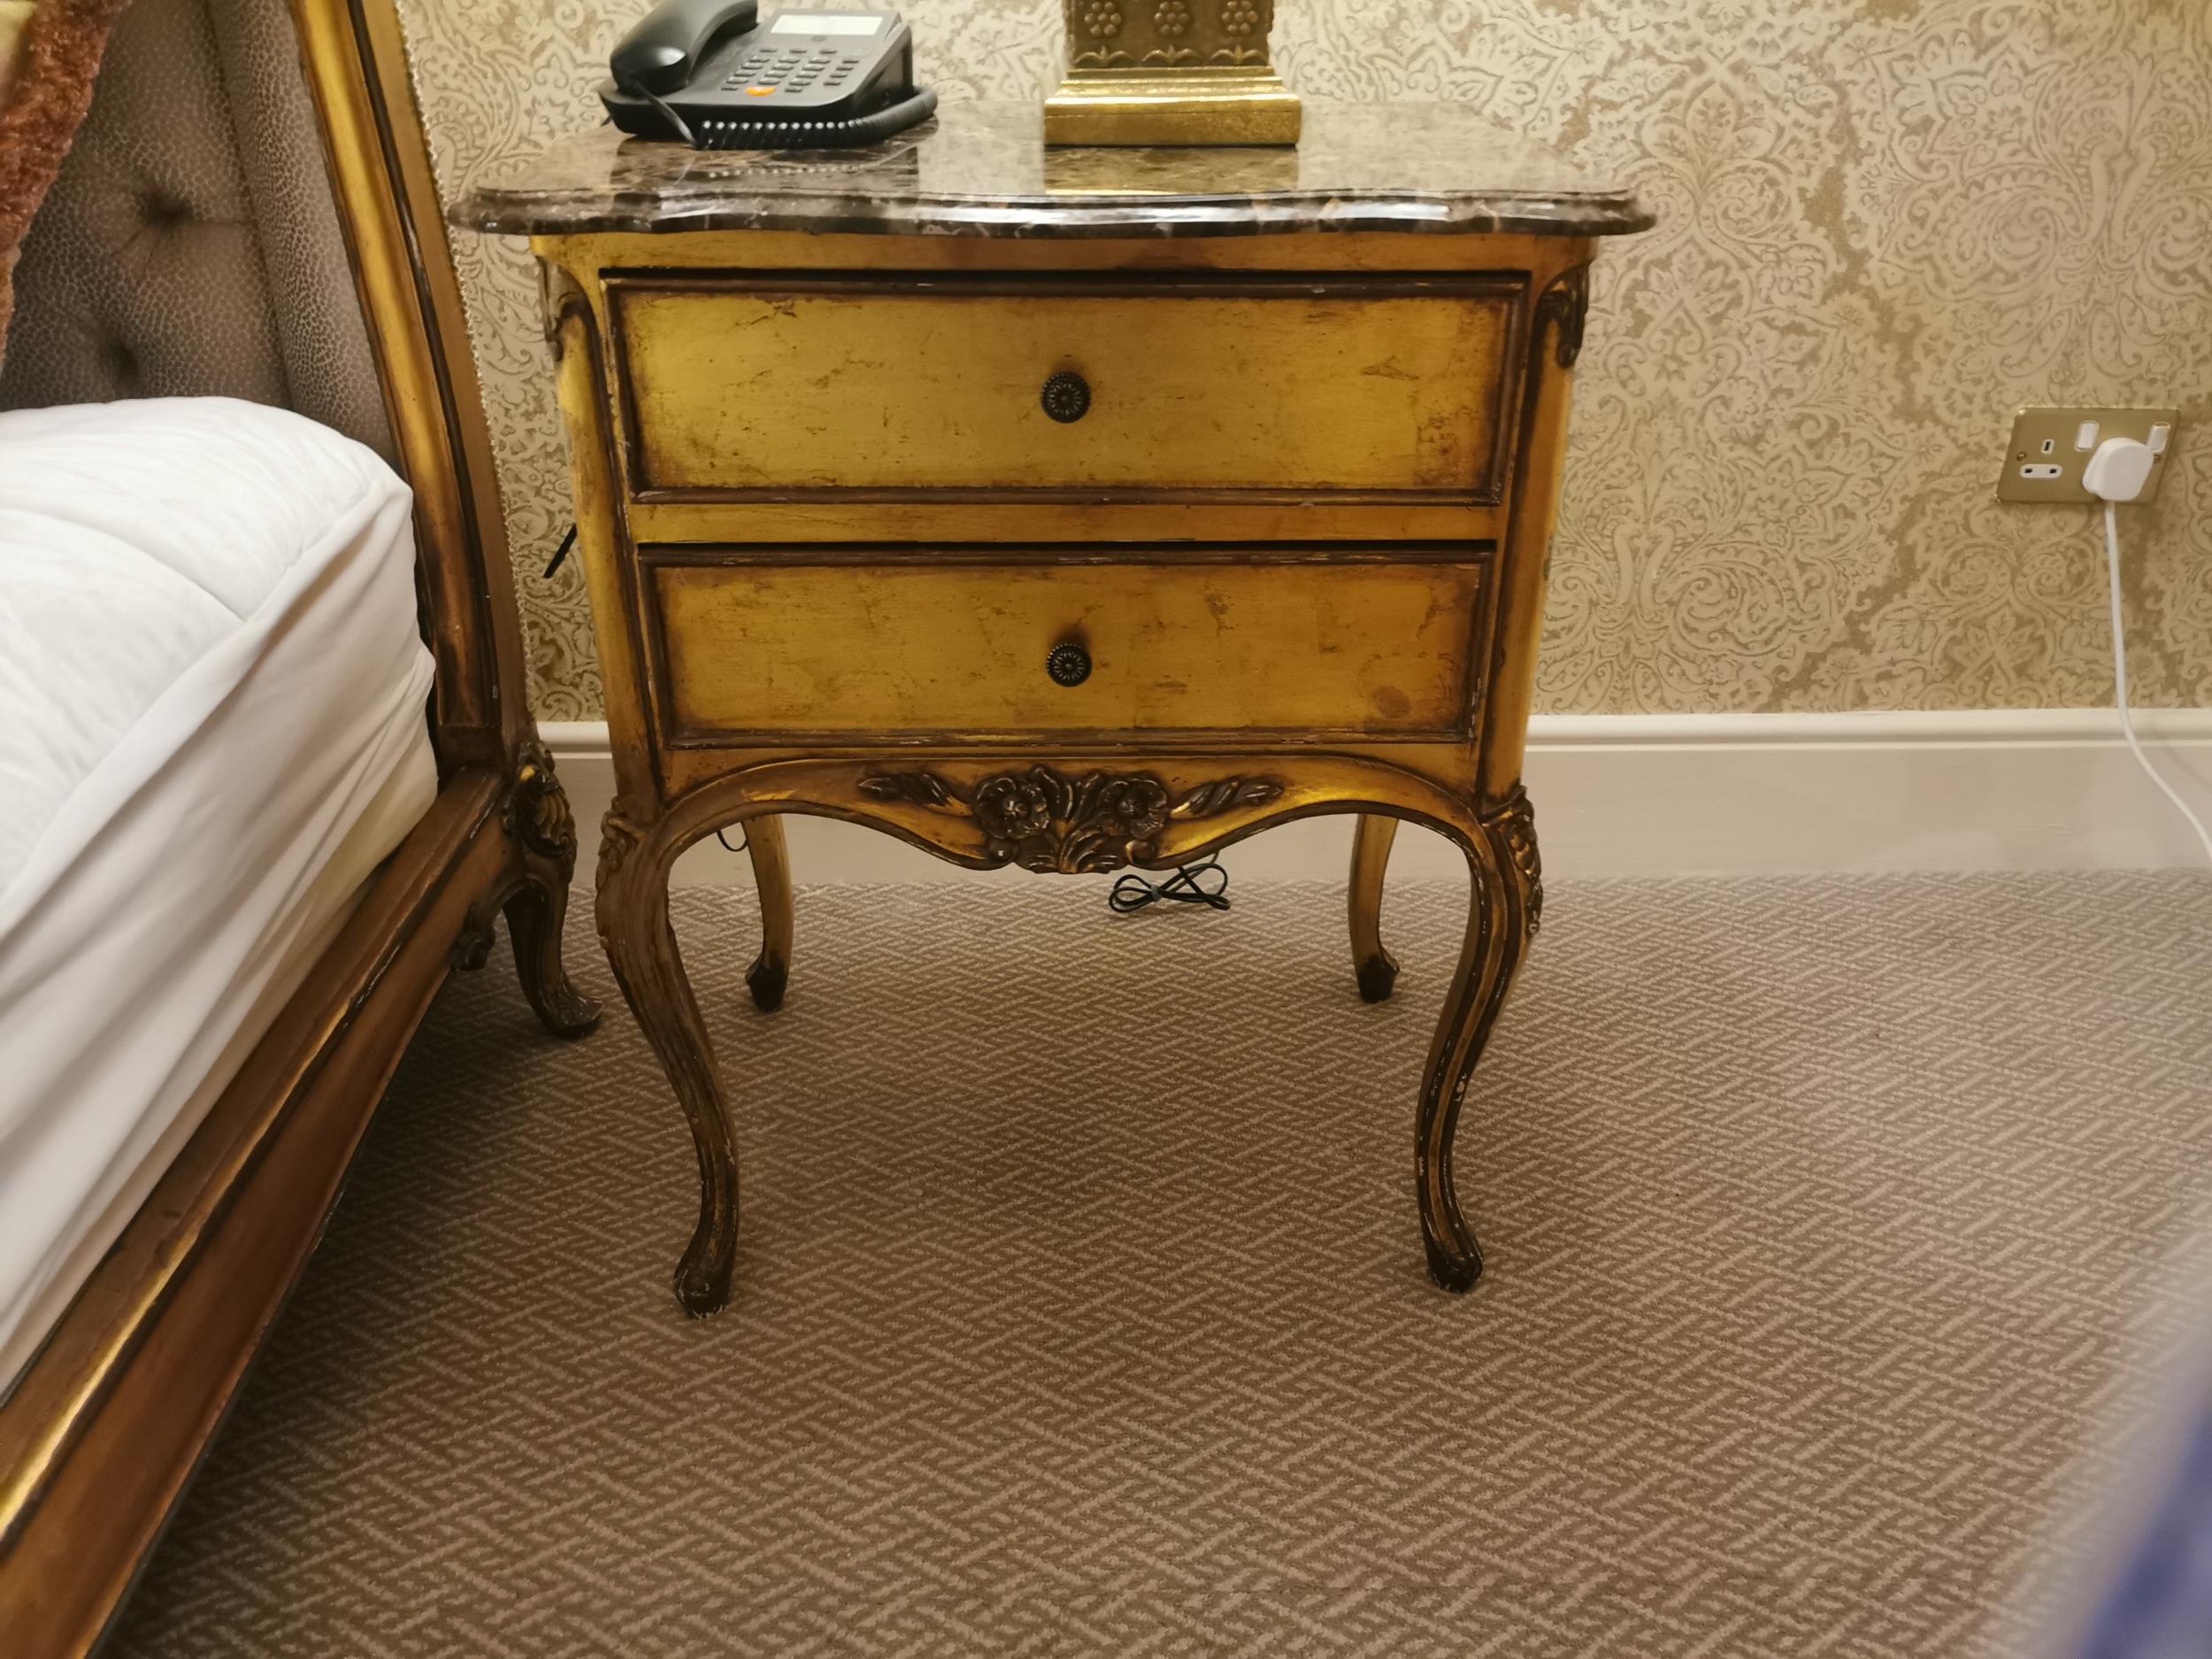 Pair of French giltwood bedside cabinets with marble top {72 cm H x 59 cm W x 40 cm D}. - Image 3 of 4